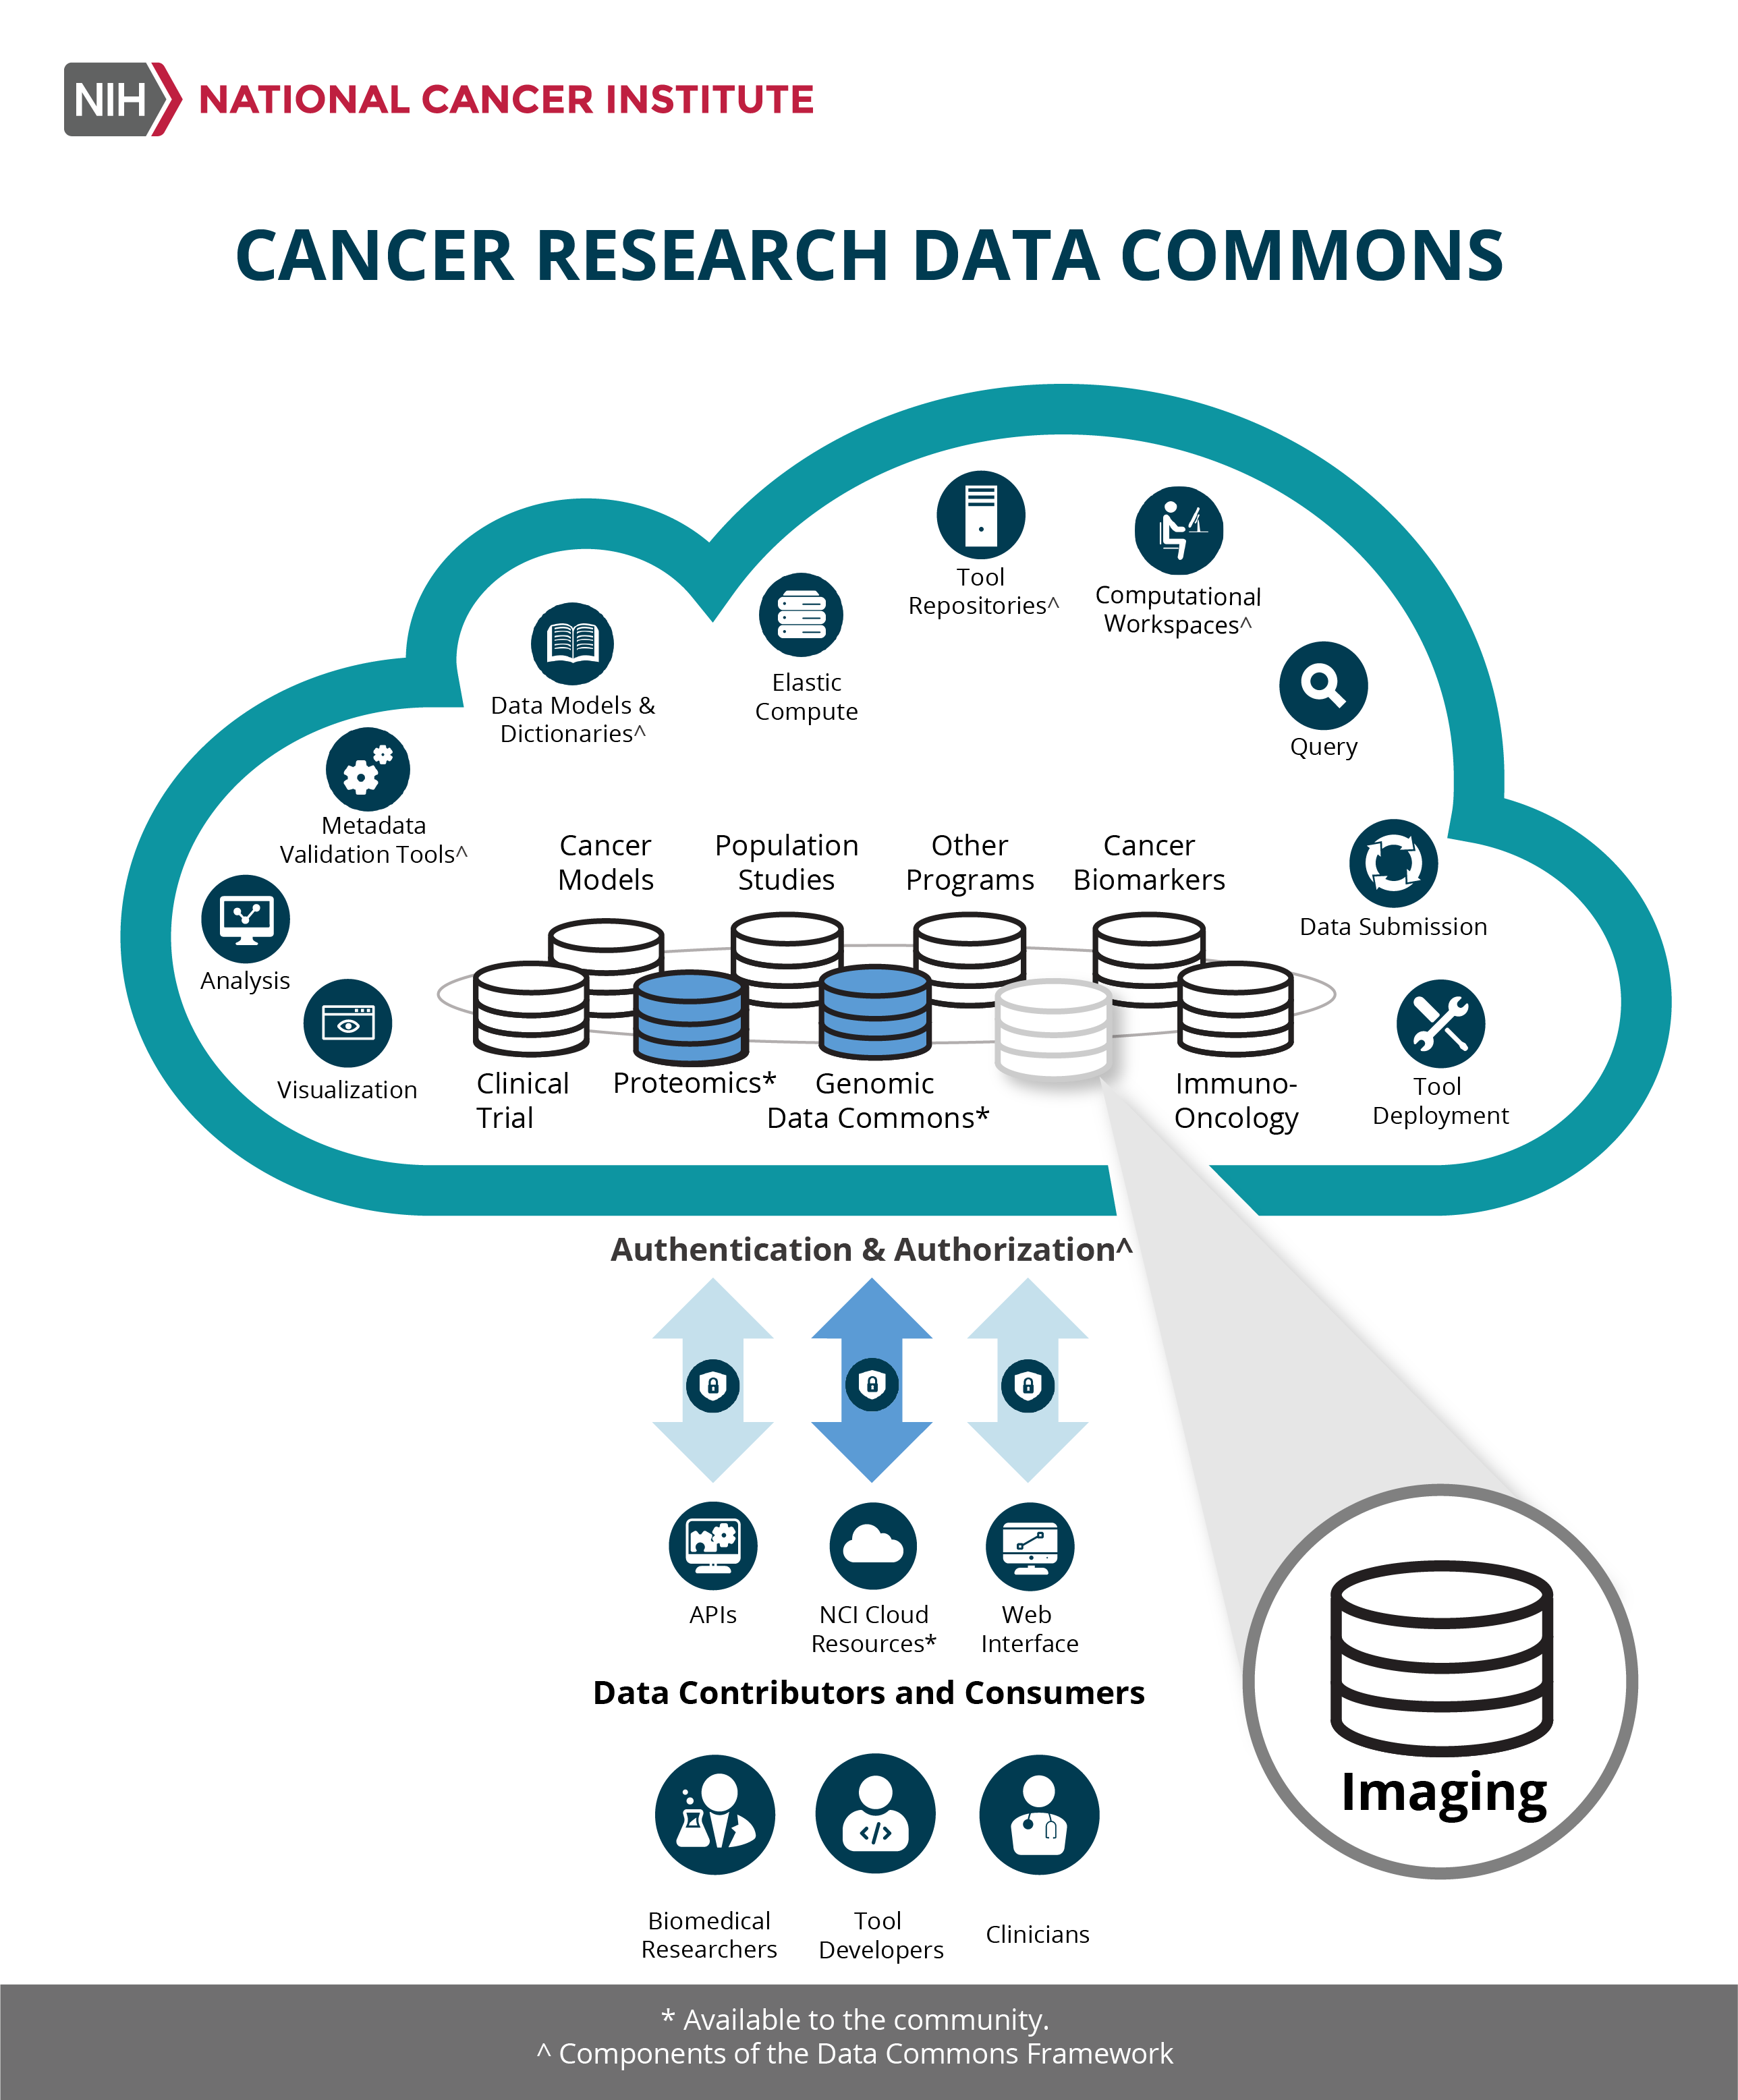 Illustrated Cancer Research Data Commons (CRDC). Along the inside lining of the cloud are icons that say “Visualization,” “Analysis,” Metadata Validation Tools,” Data Models & Dictionaries,” “Elastic Compute,” “Tool Repositories,” “Computational Workplaces,” “Query,” “Data Submission,” and Tool Development.” In the lower part of the cloud are small disks representing the different repositories housed within the CRDC. Active repositories (Genomics, Proteomics) are shown in a darker color. Other repositories (which are being planned or in development include “Clinical Trial,” “Immuno-oncology,” “Cancer Biomarkers,” “Population Studies,” “Cancer Models,” and “Other Programs”) are shown in white. One repository (Imaging) is shown as an inset. At the bottom of the cloud are three double-headed arrows pointing to/from icons that represent “APIs,” “NCI Cloud Resources,” and “Web Interface.” Beneath these icons are the words “Data Contributors and Consumers. They are represented by icons showing “Biomedical Researchers,” “Tool Developers,” and “Data Scientists.” 
